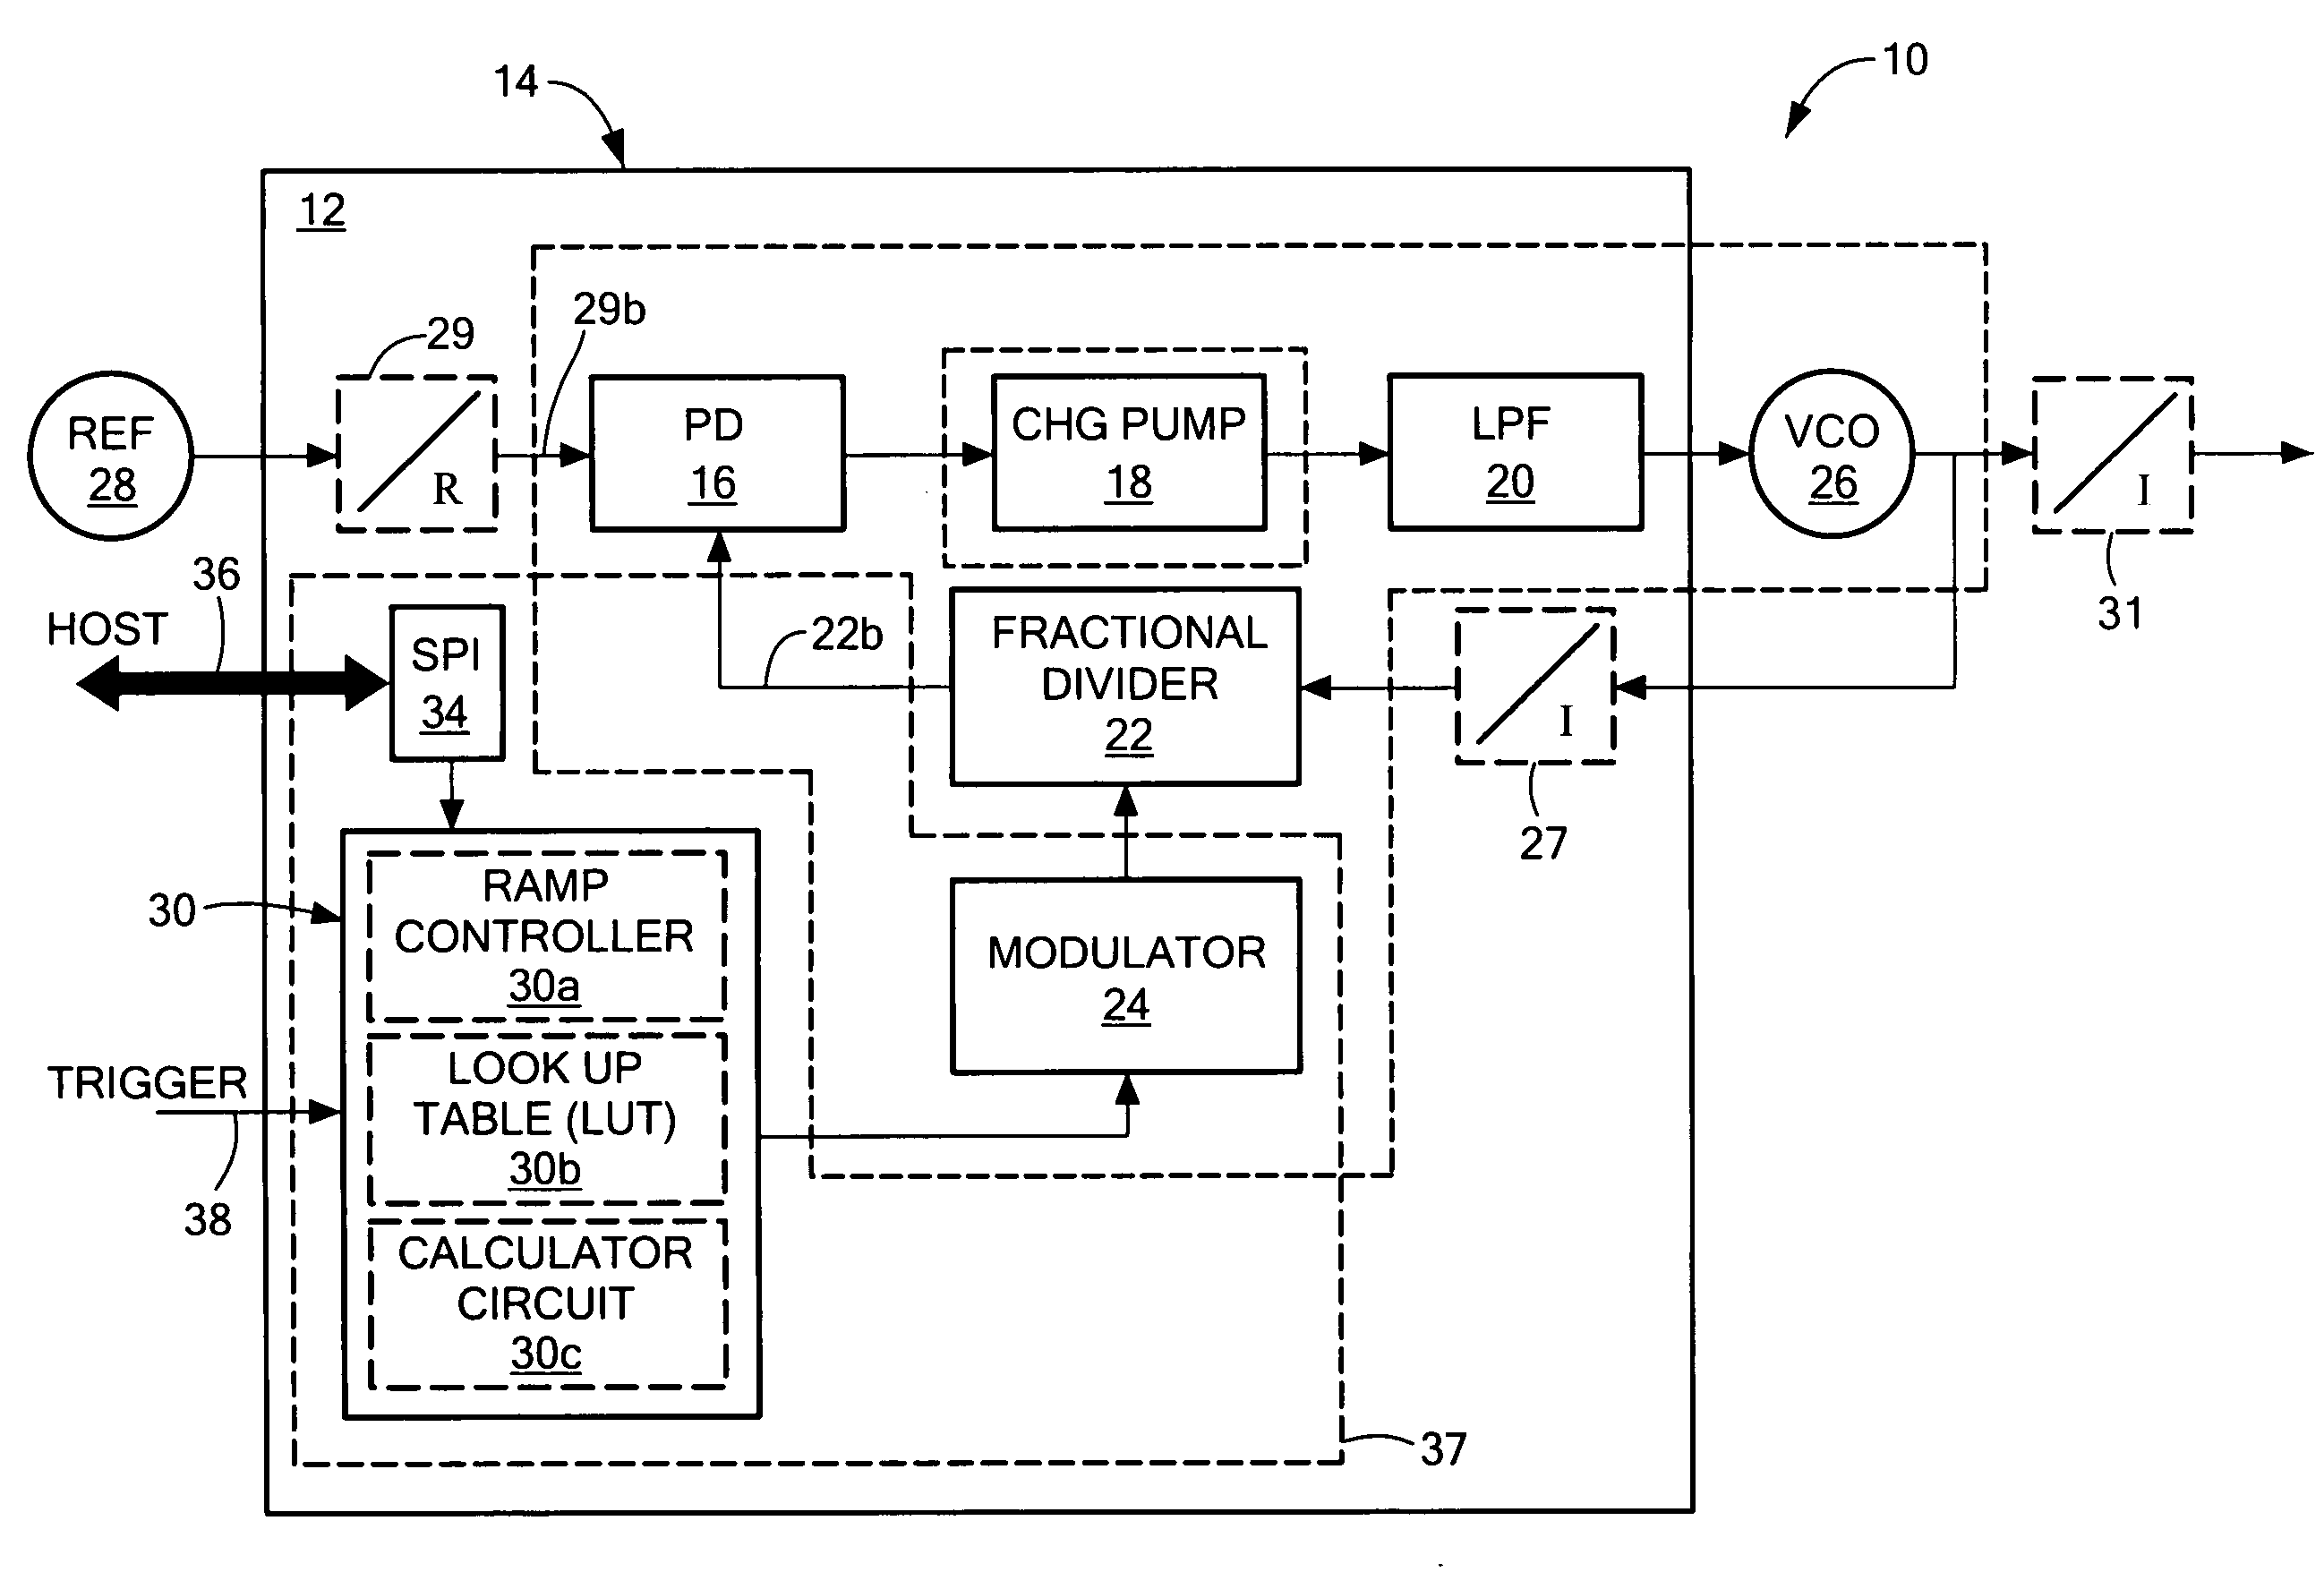 Integrated ramp, sweep fractional frequency synthesizer on an integrated circuit chip